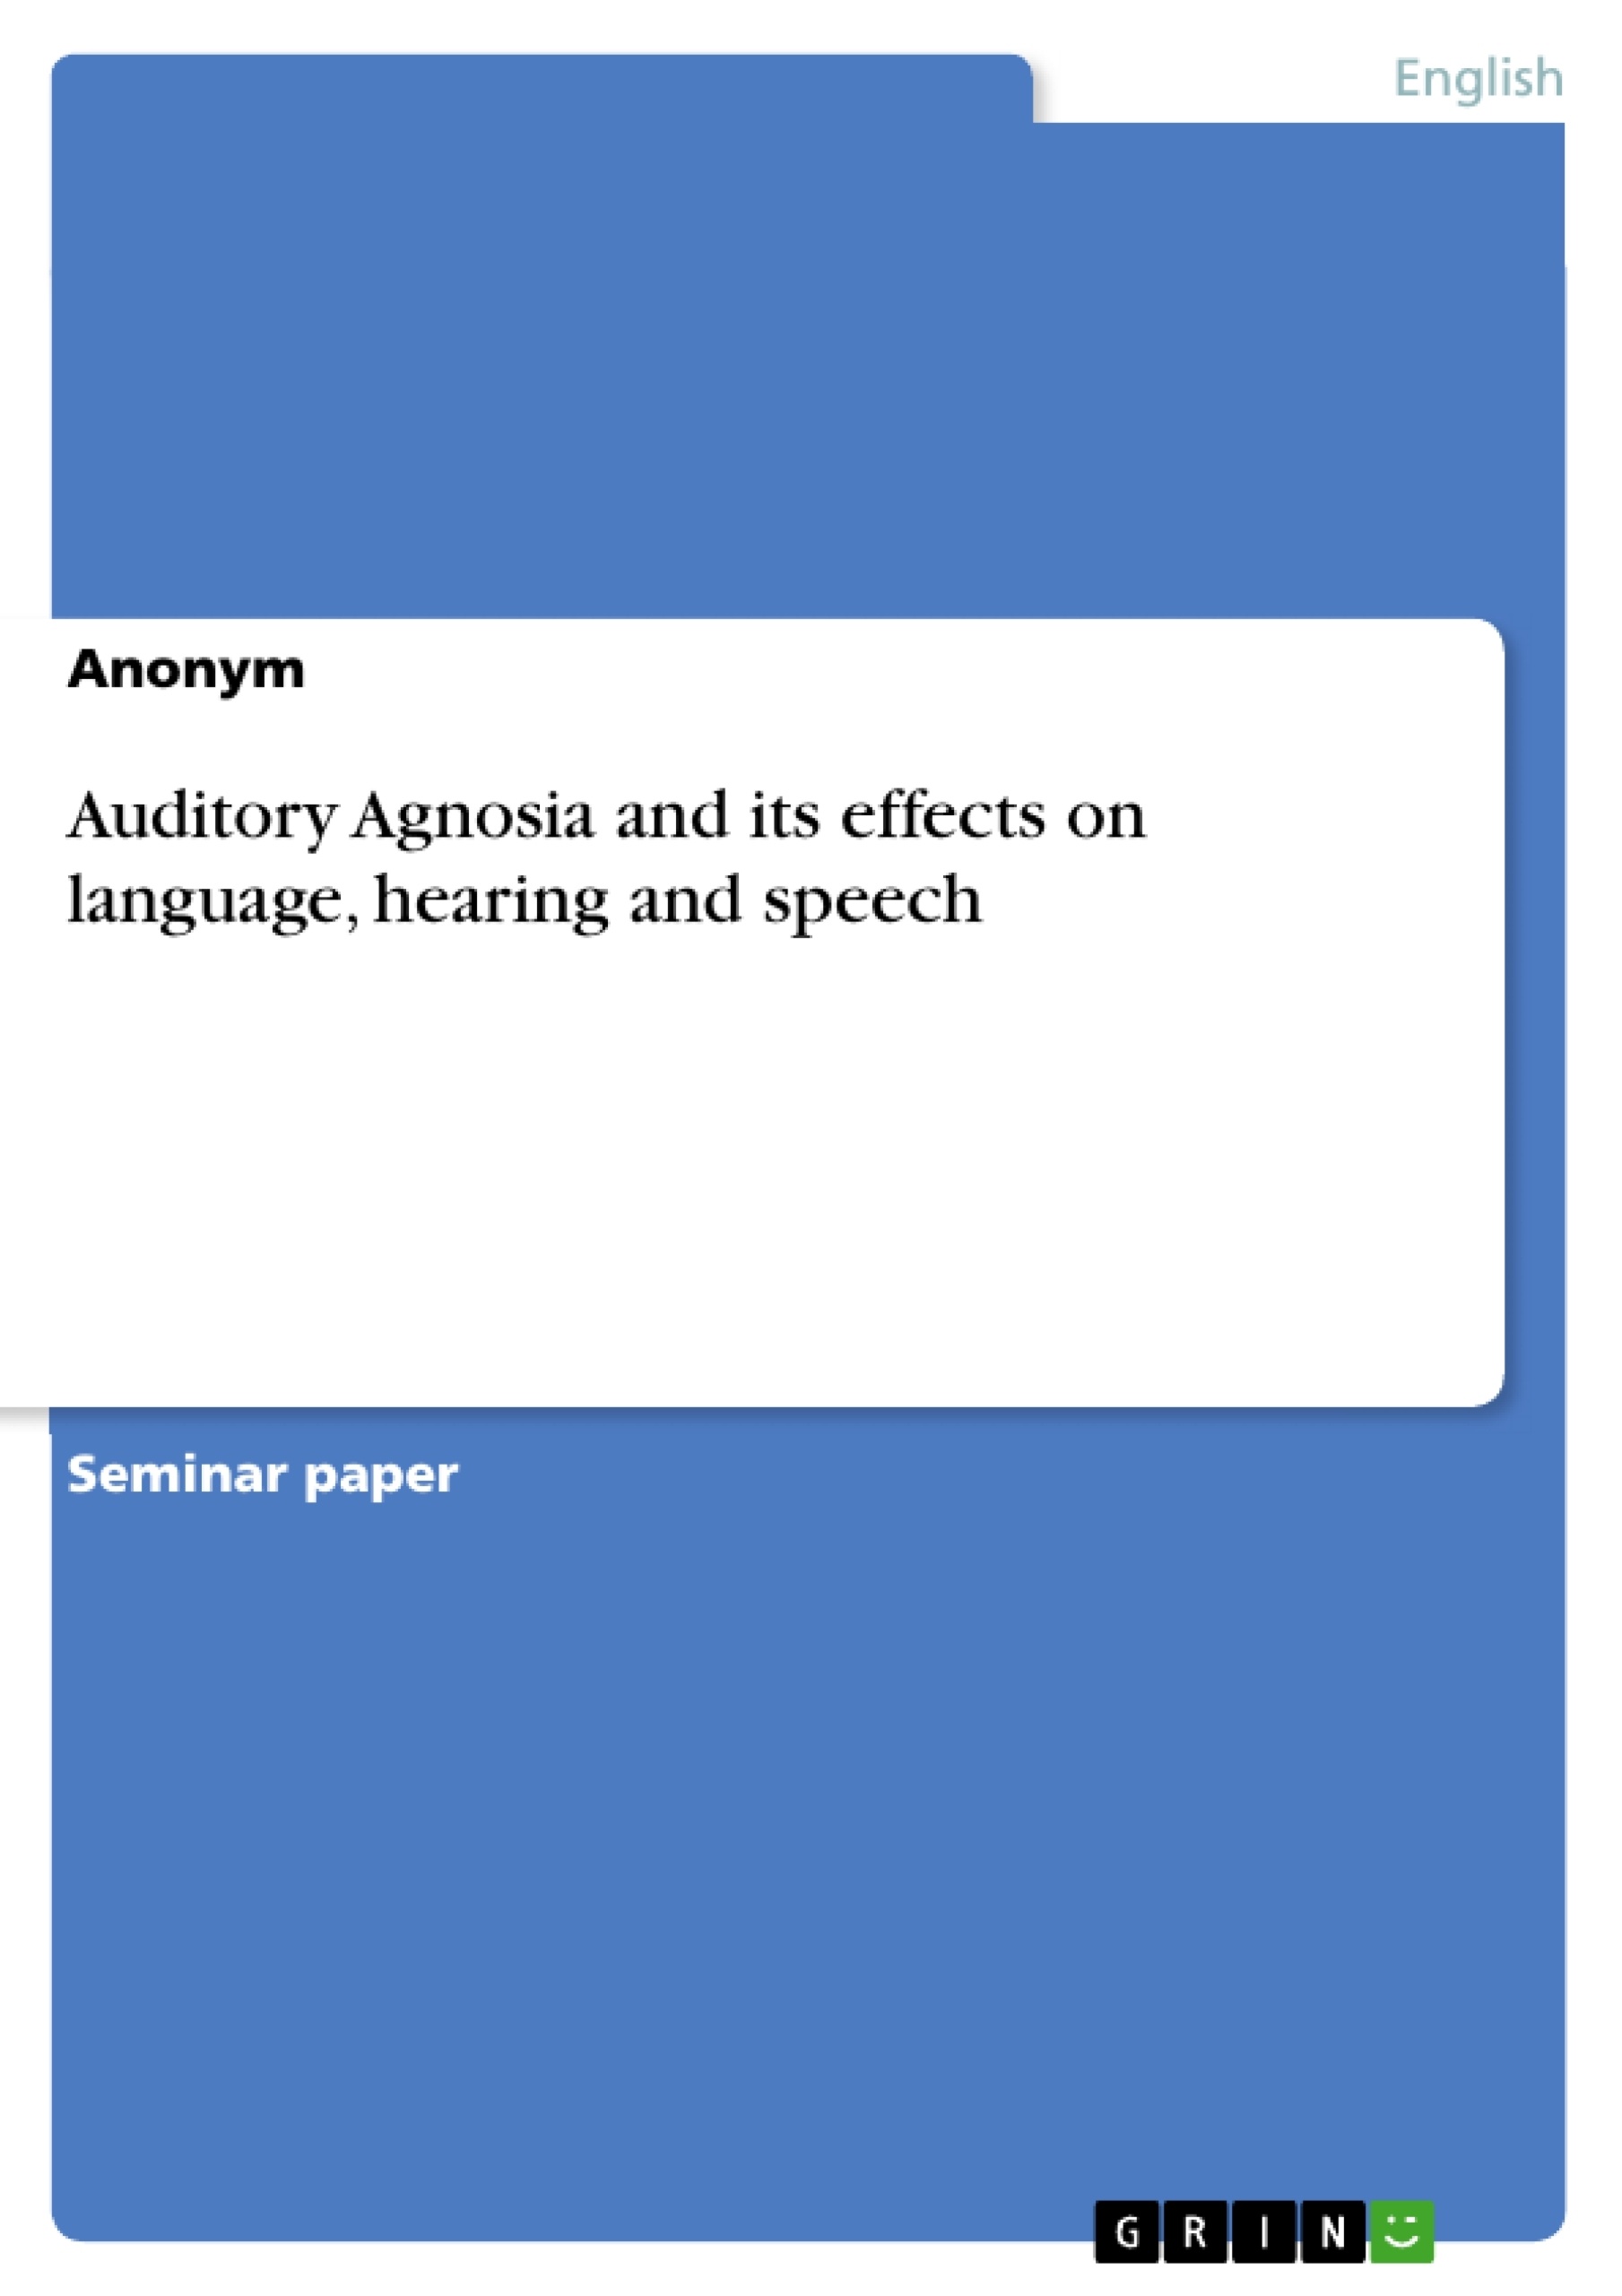 Título: Auditory Agnosia and its effects on language, hearing and speech